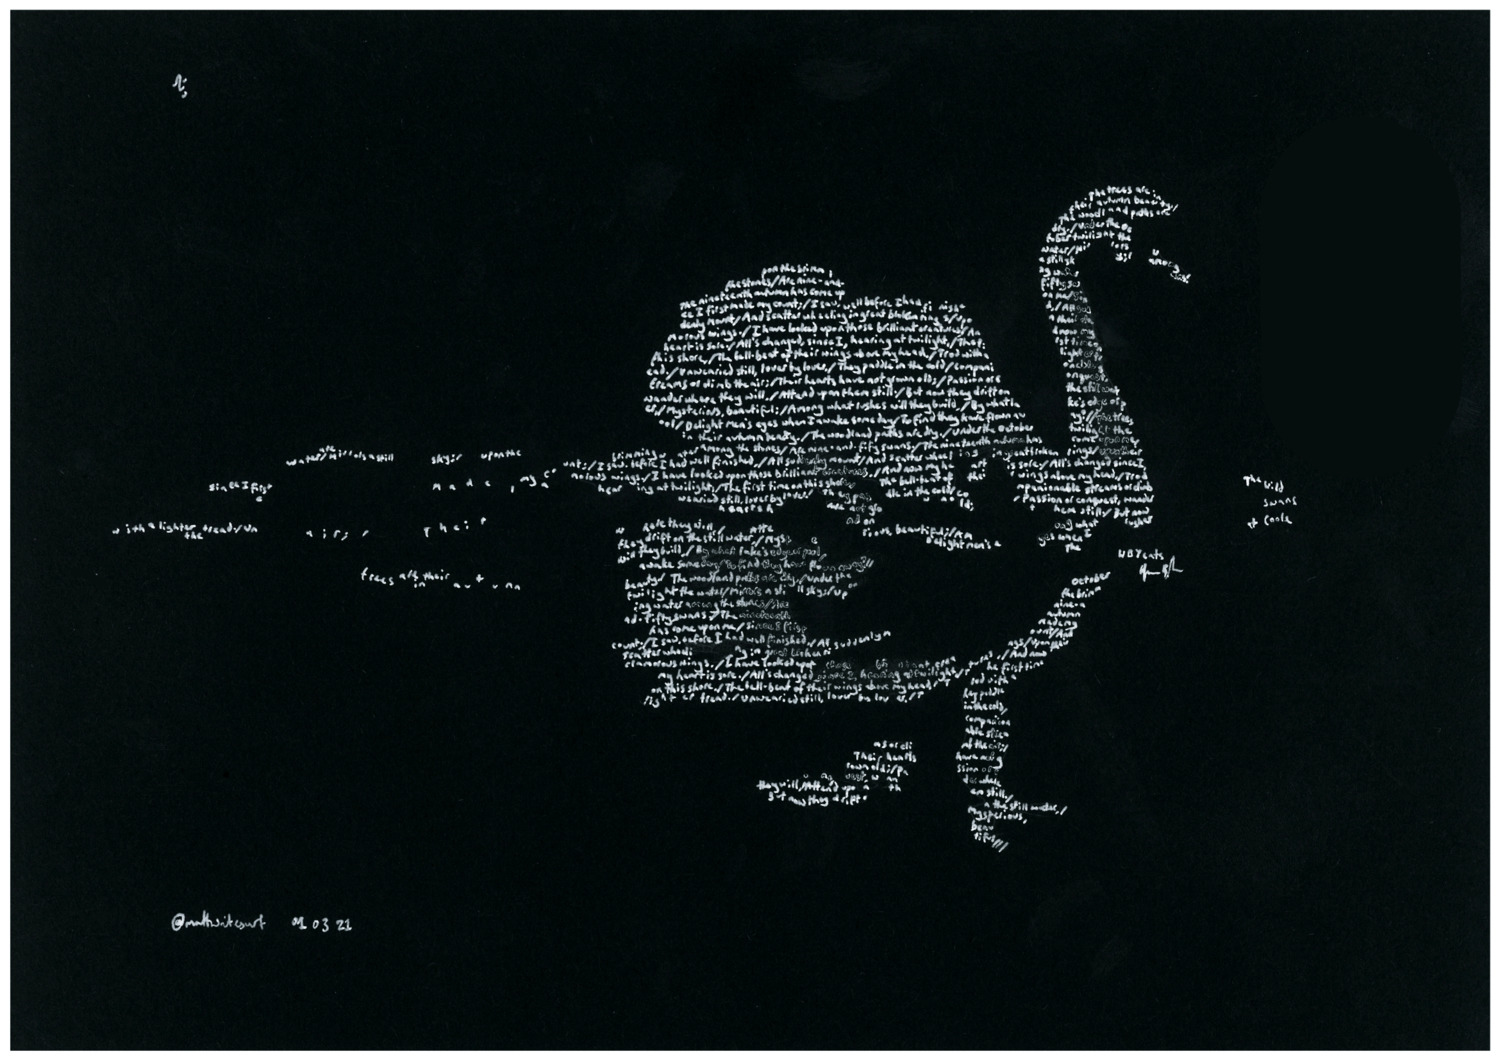 Swan drifting, on poem 'The Wild Swans at Coole', by WB Yeats (1865-1939)